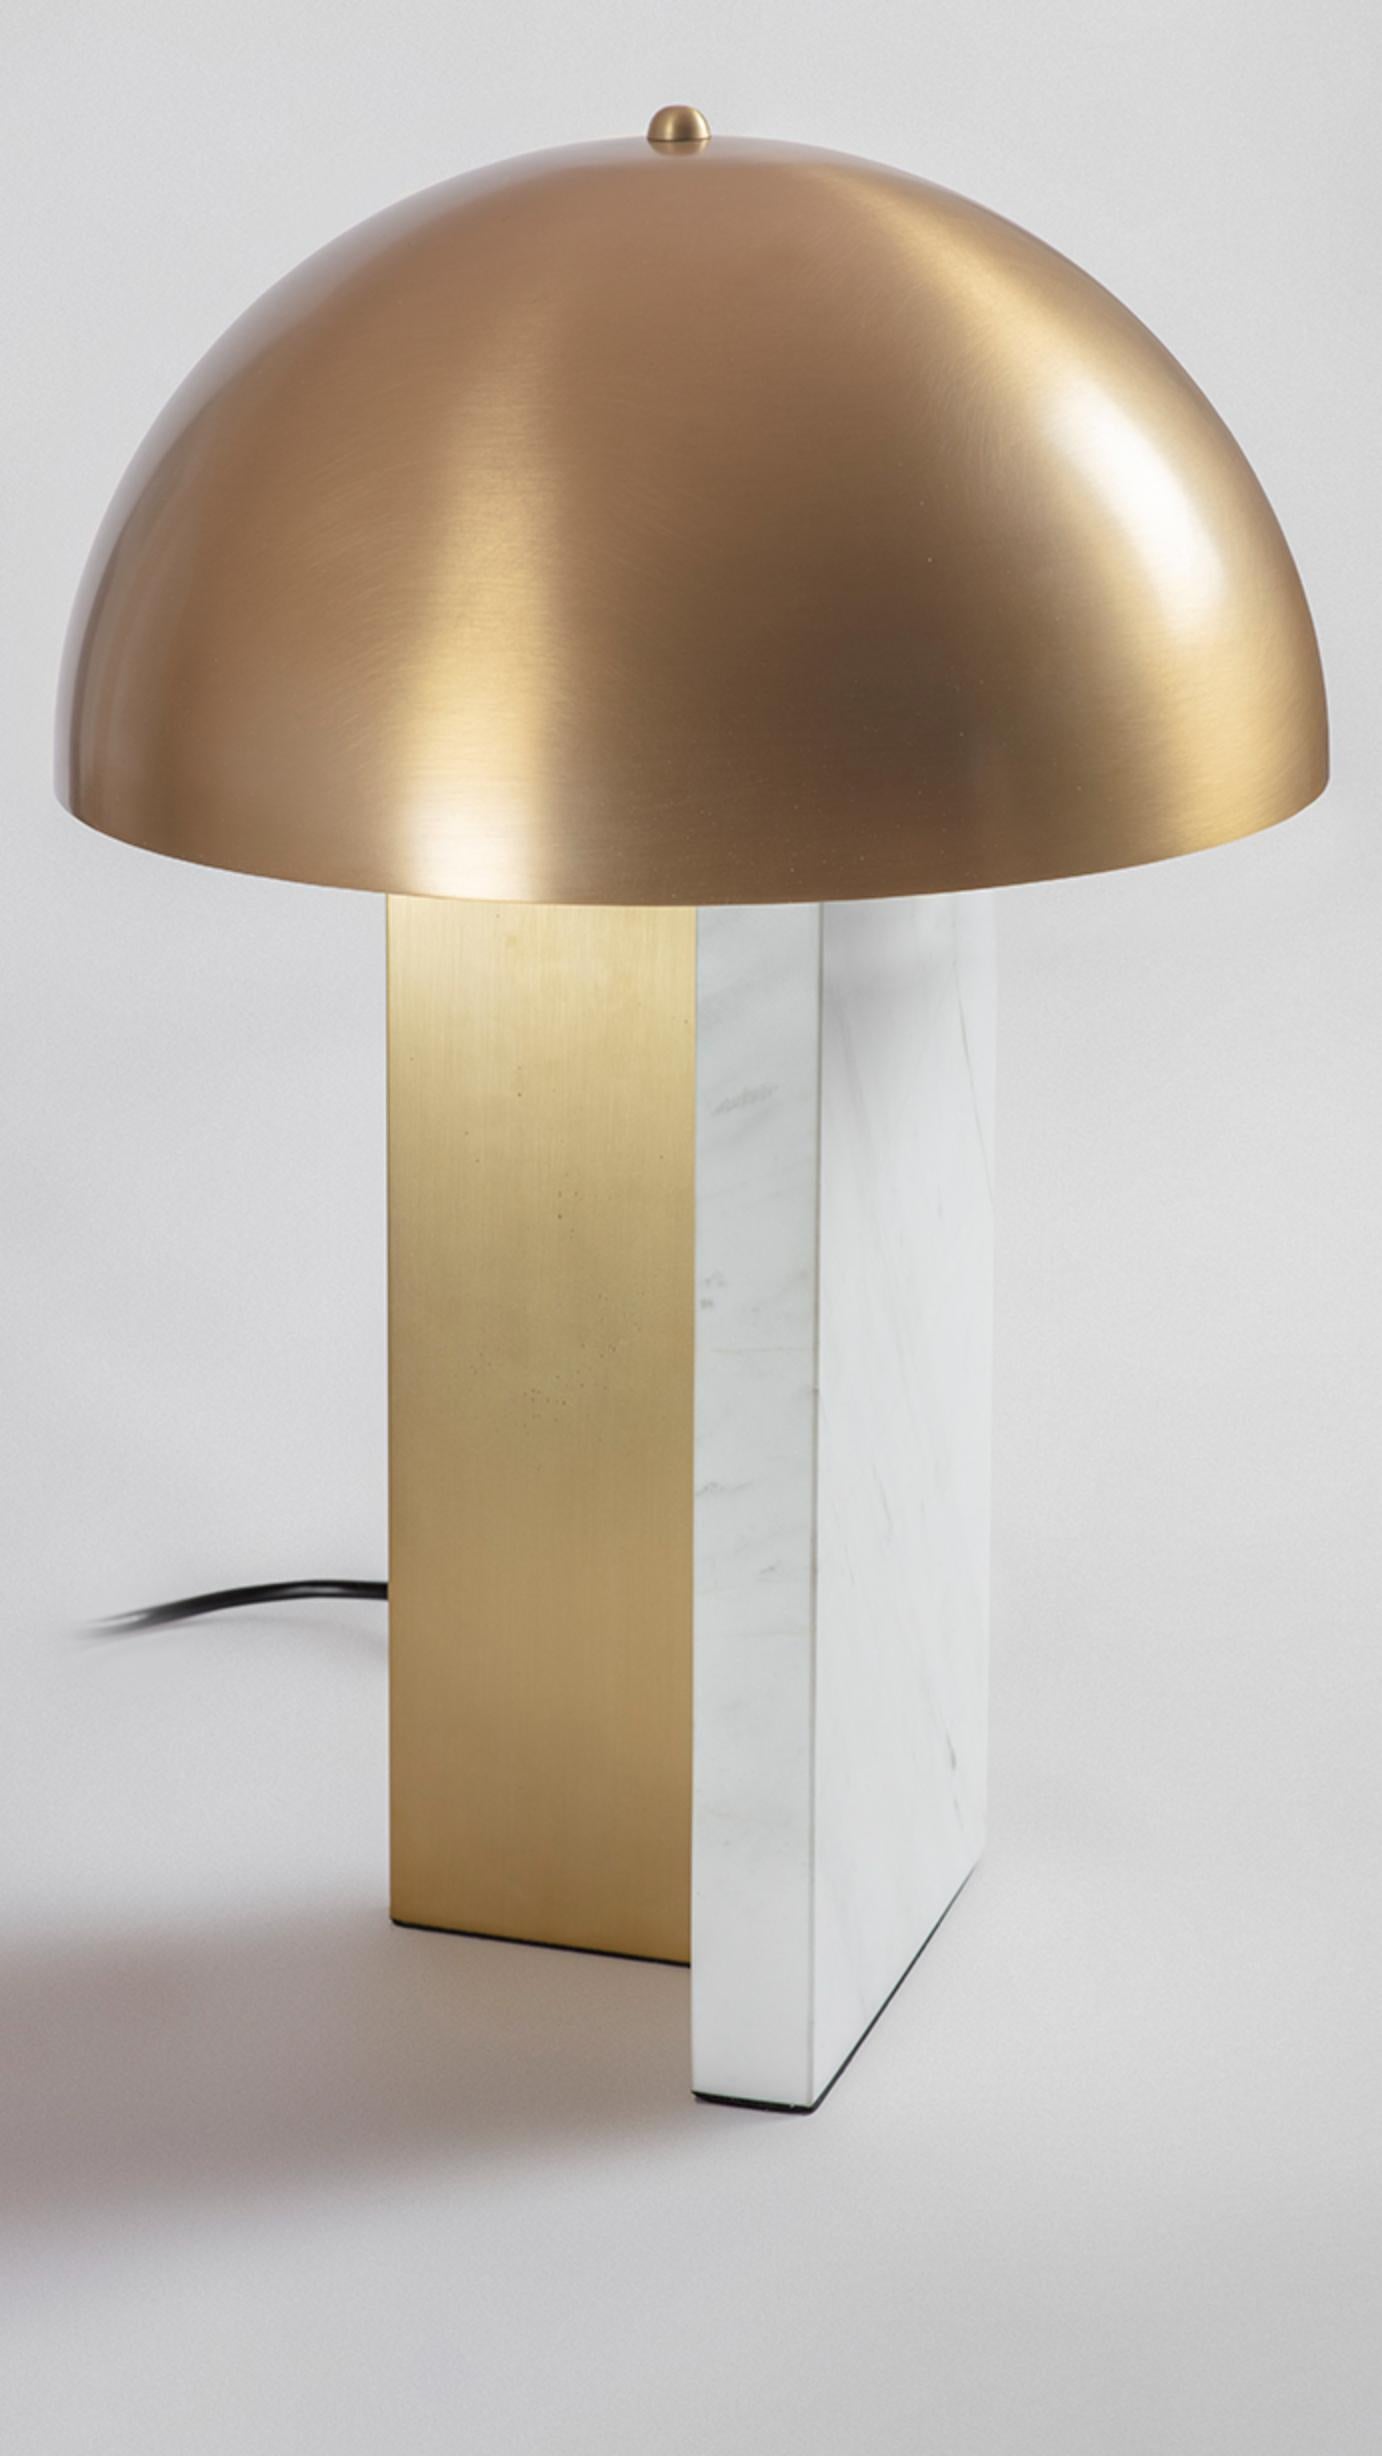 Dome table lamp by Square in Circle, 2022
Dimensions: H 43 x D 30 cm
Materials: Brushed brass, white marble

A minimalist table lamp with a bold silhouette brushed brass dome and a unique block white marble base. The base design features two